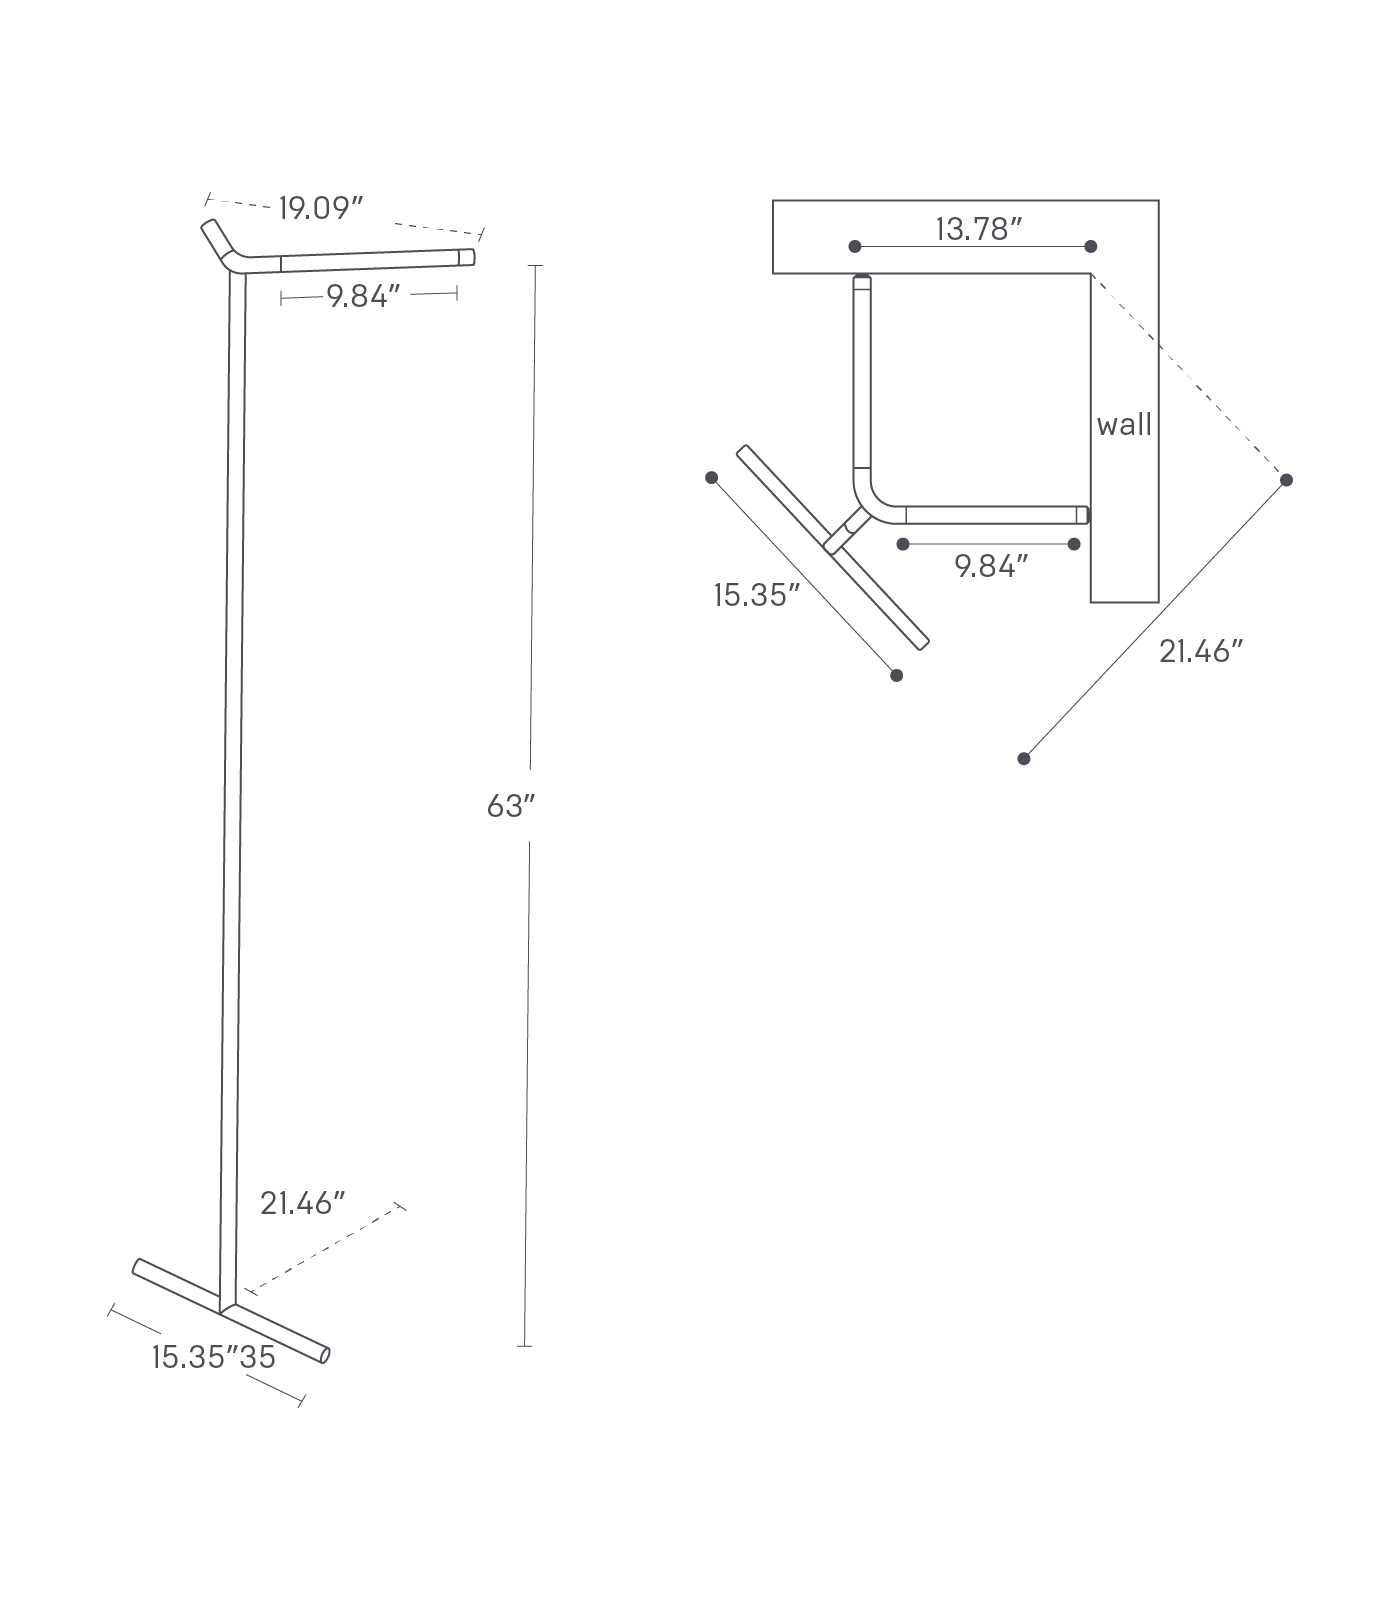 Dimension image for Corner Leaning Coat Rack showing a total height of 63